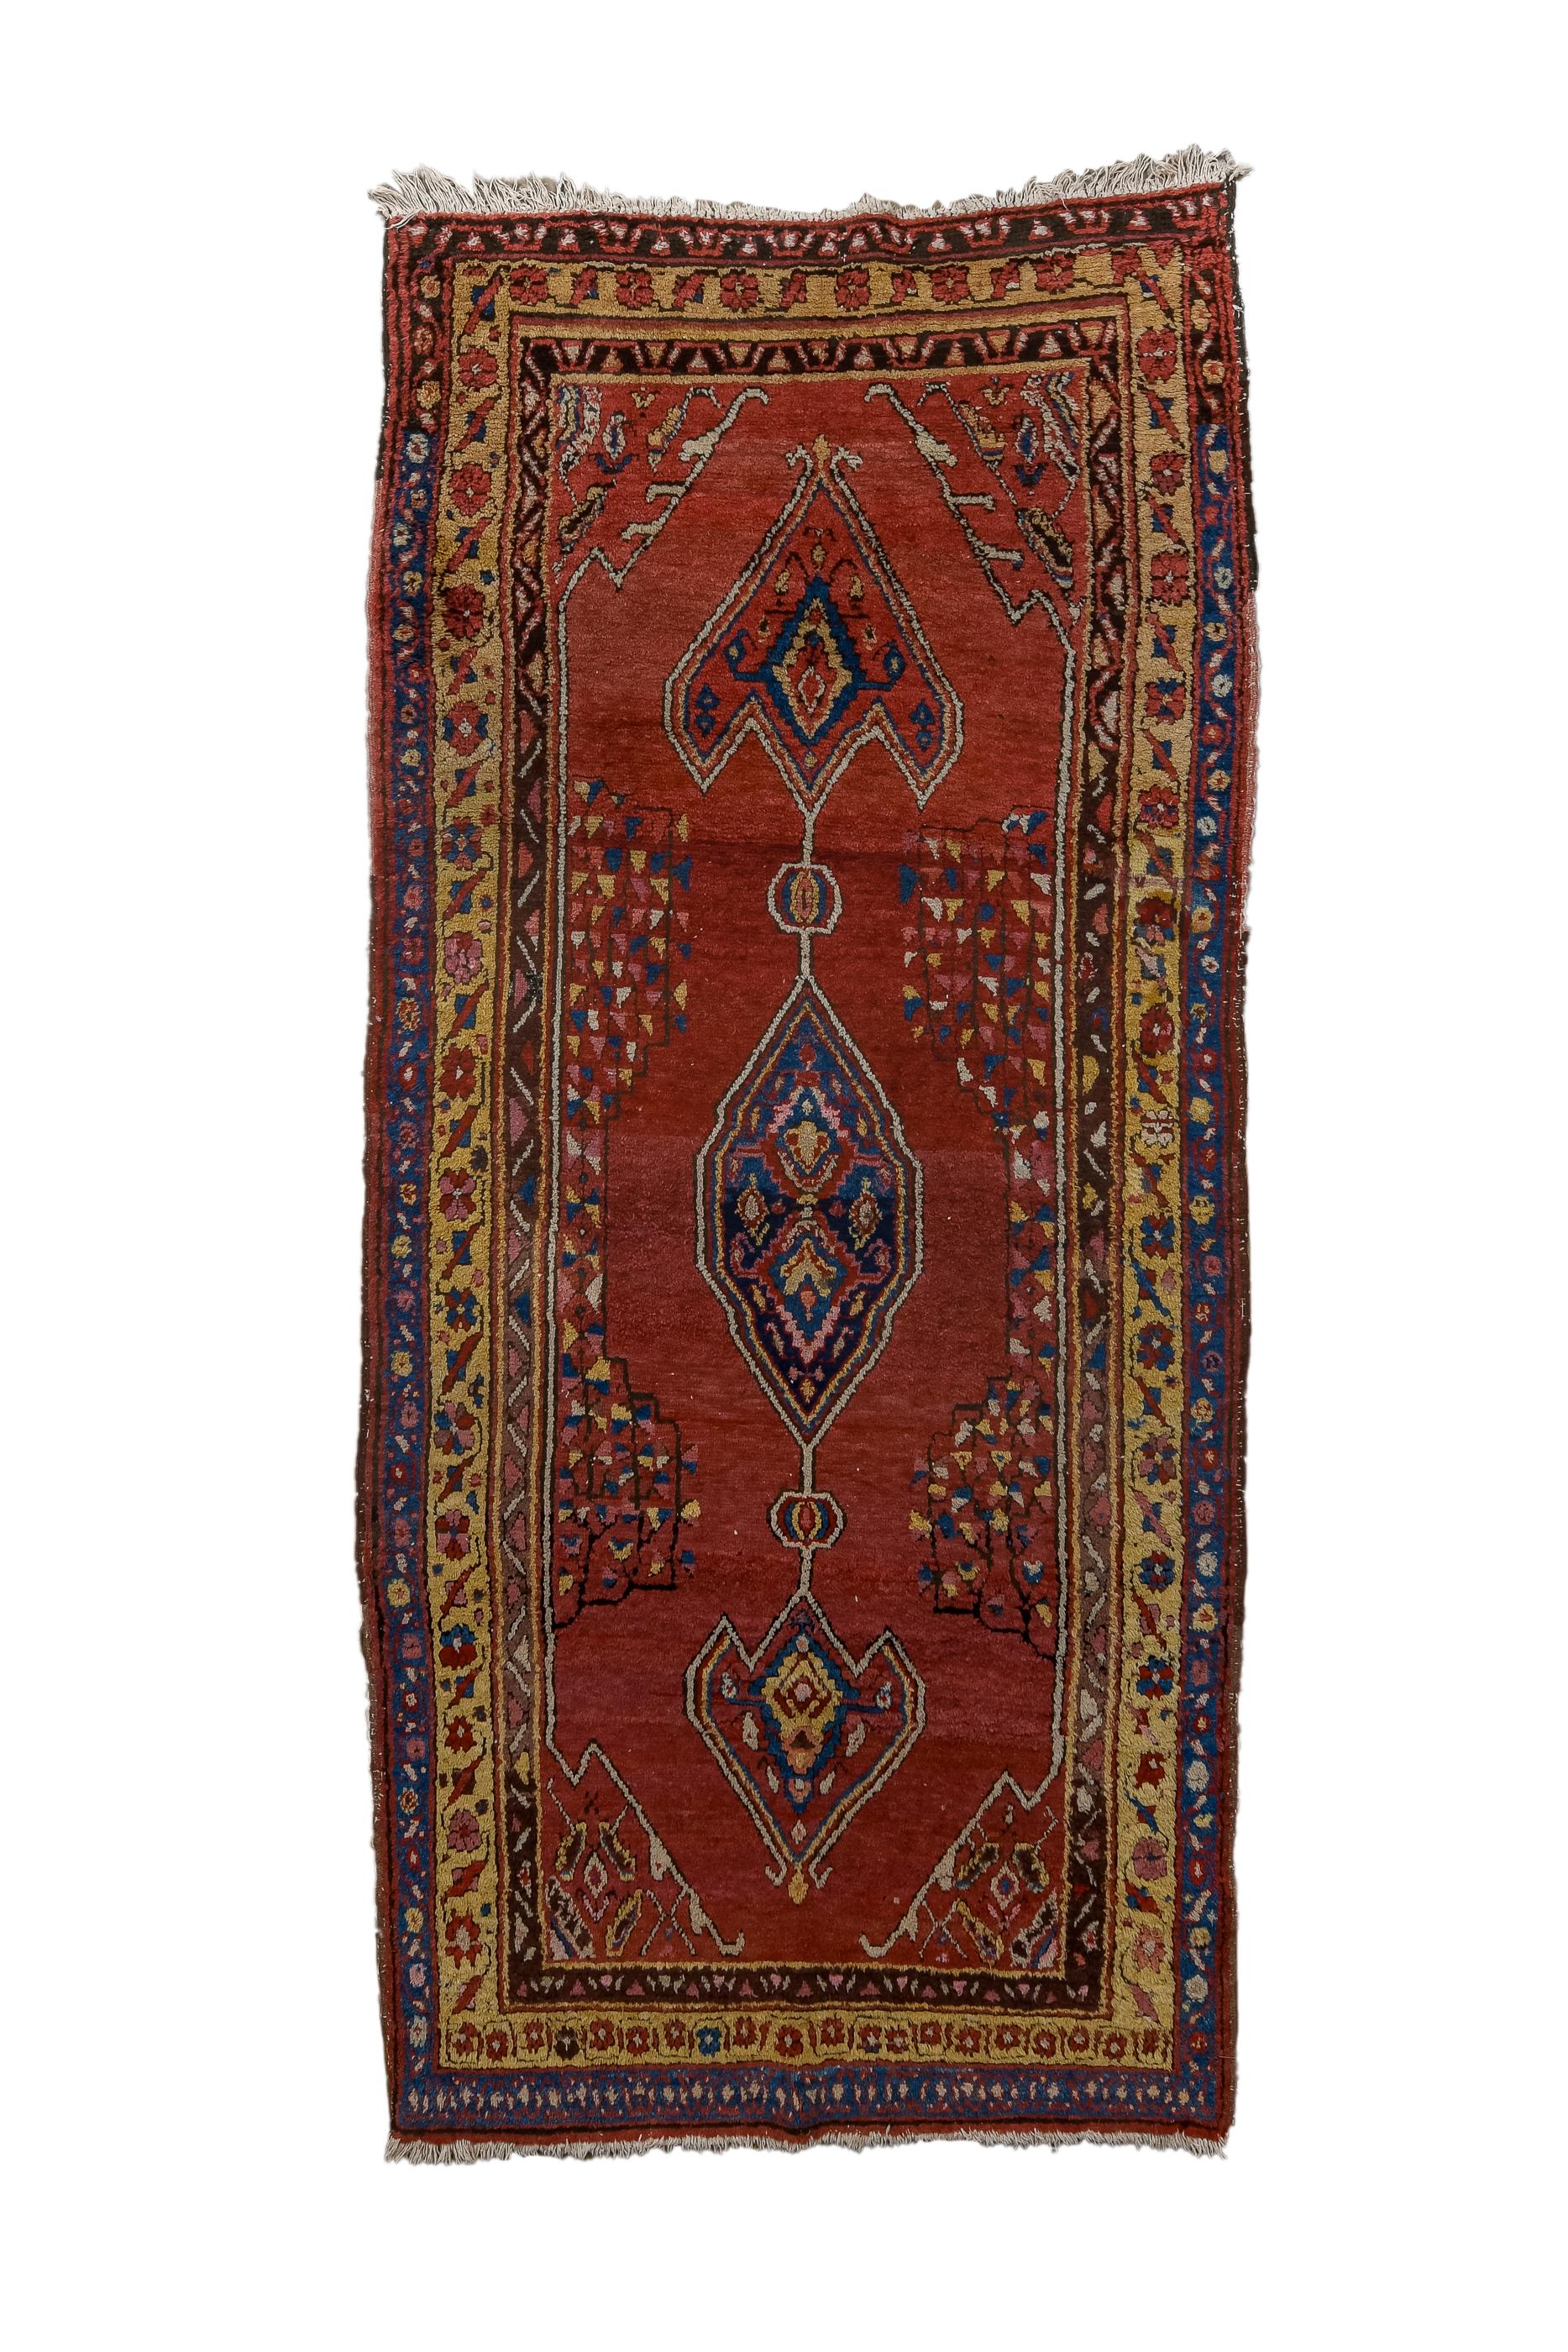 This ebulliently coloured kellegi (long rug) shows a tripartite pole medallion with a small hexagonal centre and giant anchor finials, on a shaped, brisk red field  with lateral partial triangle mosaics.  Goldenrod main border with rosettes and